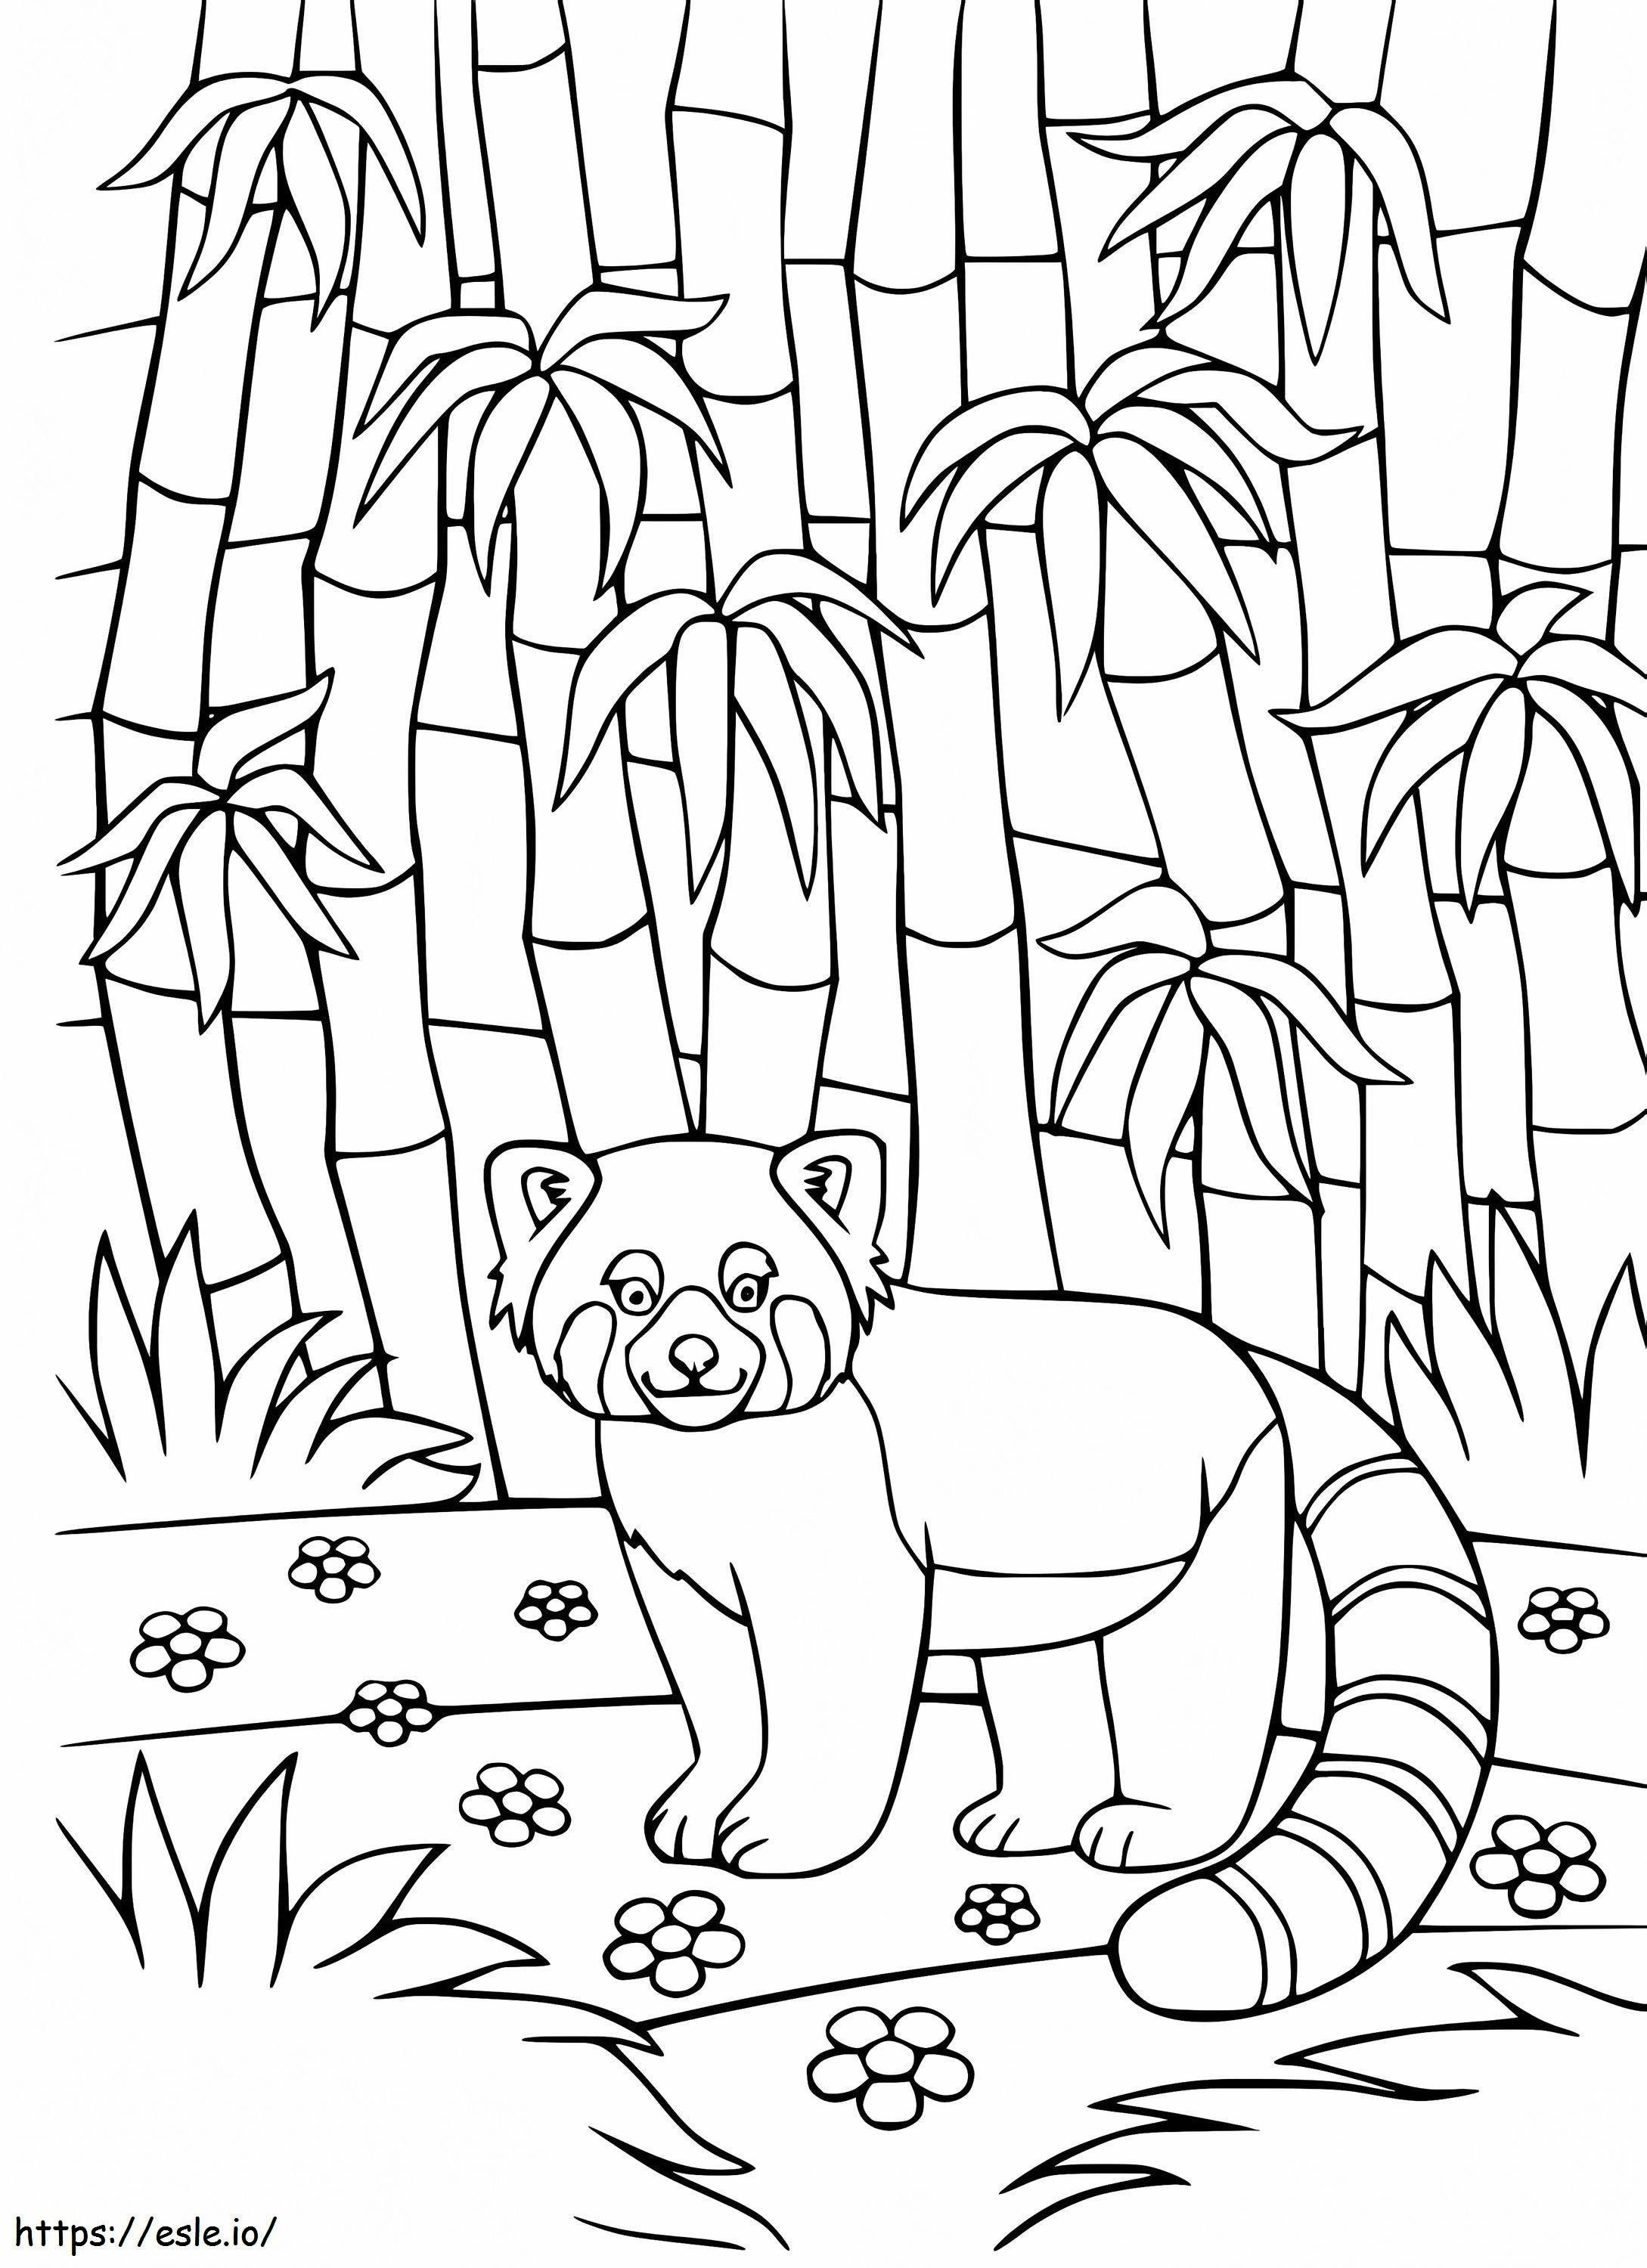 Red Panda In Bamboo Forest coloring page